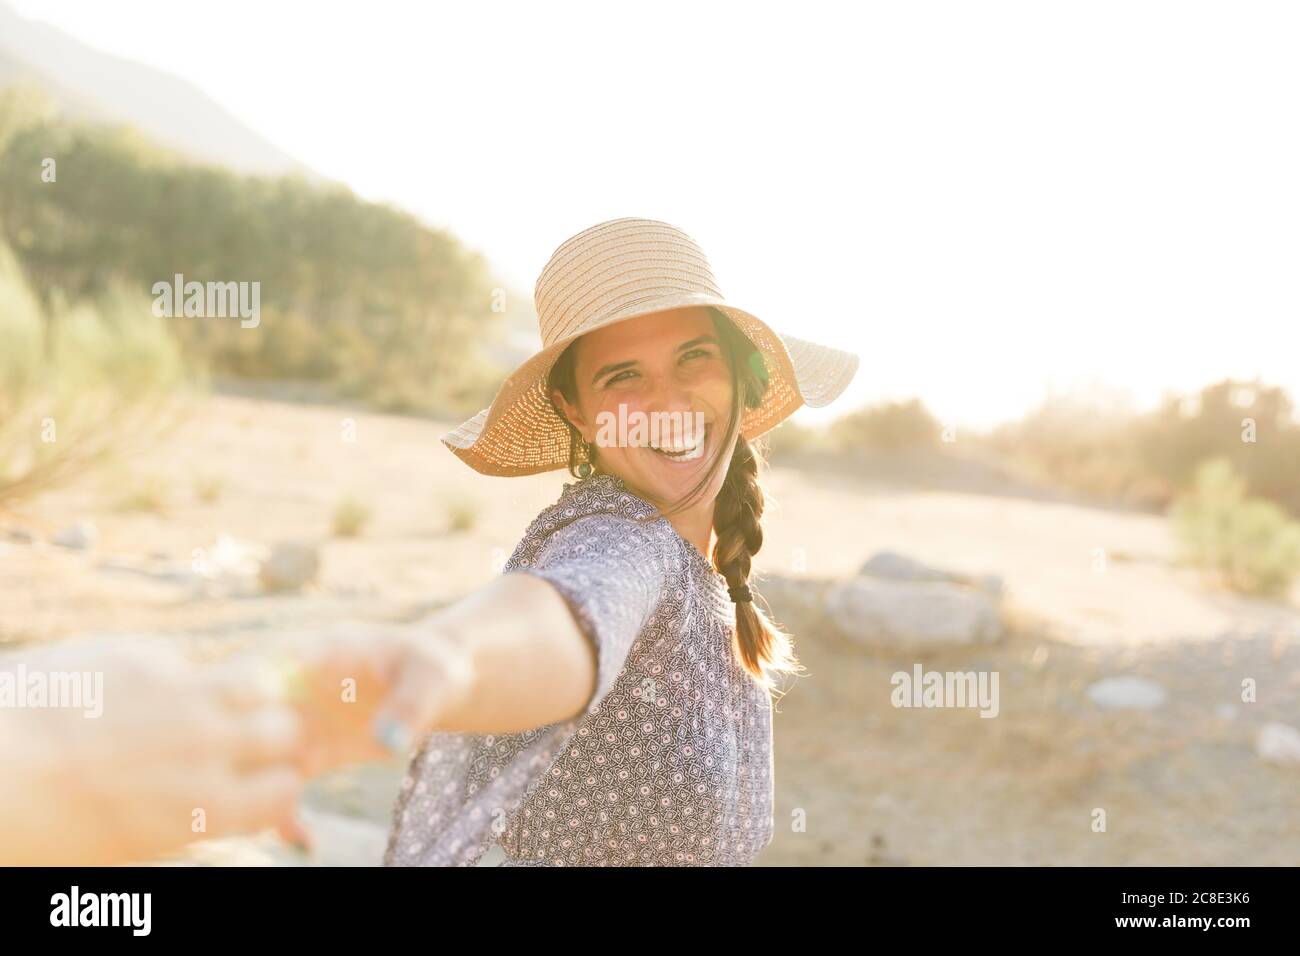 Cheerful young woman wearing sun hat during sunny day Stock Photo